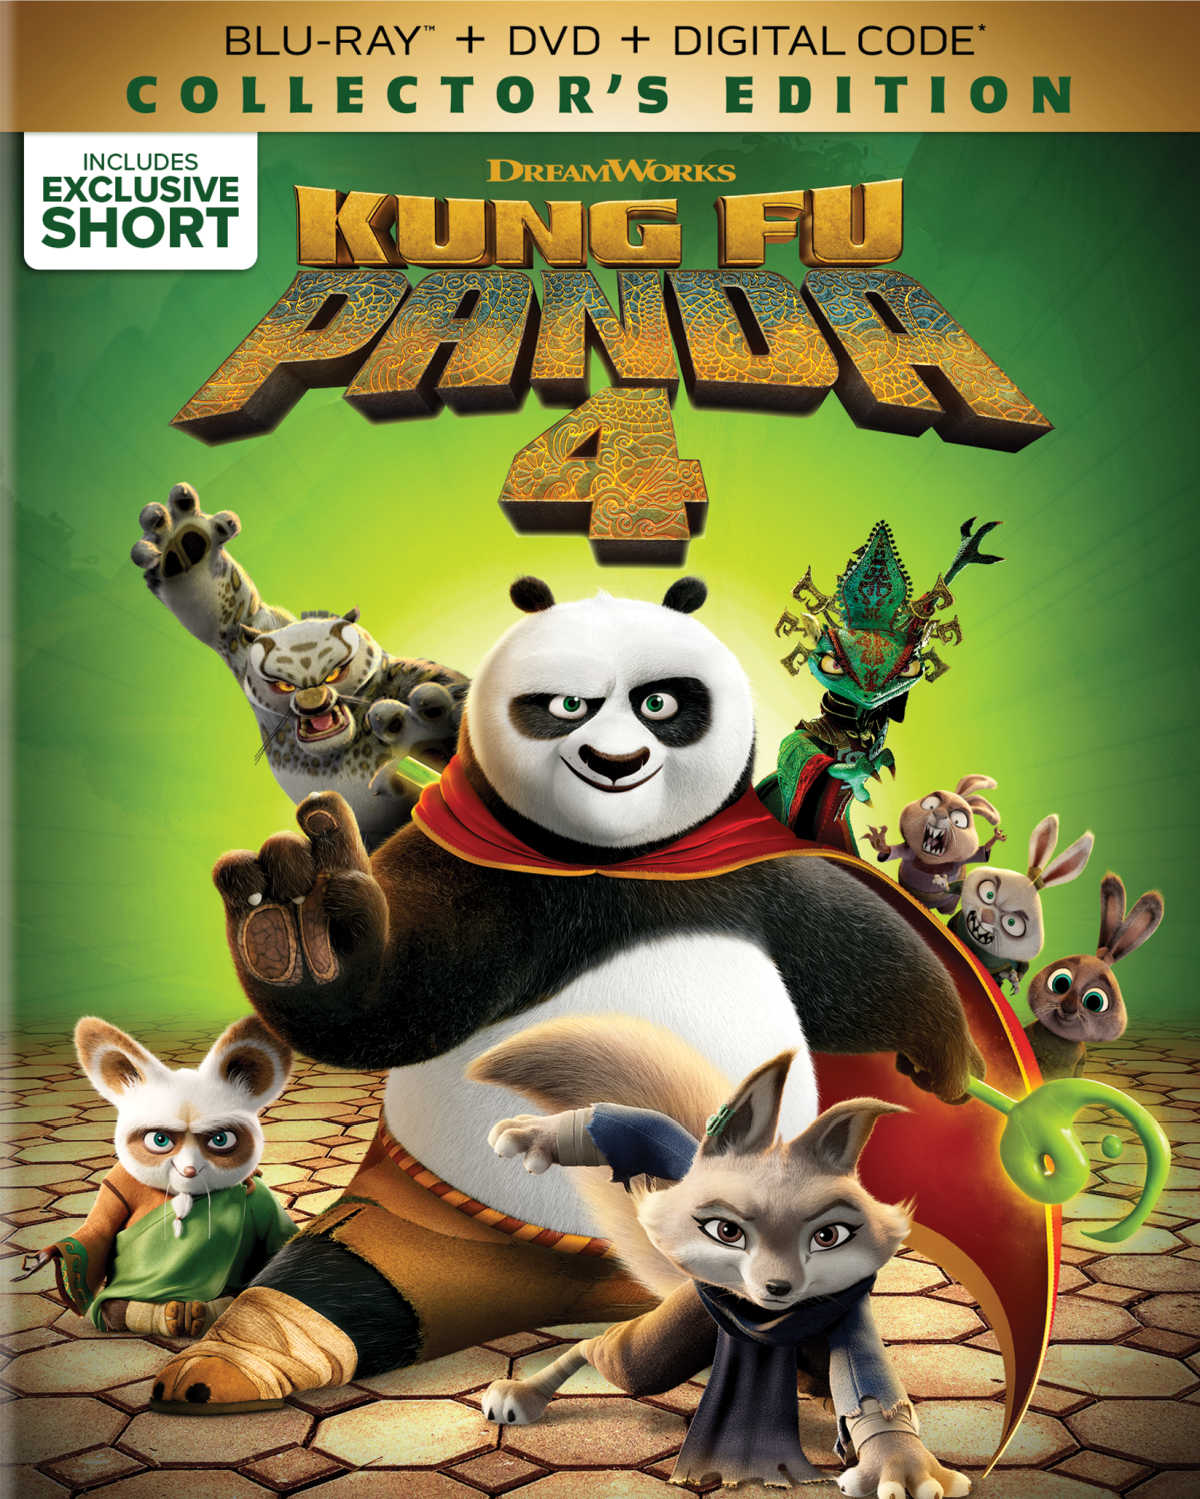 Kung Fu Panda 4 is finally here, and it's a blast! Revisit beloved characters, laugh out loud at new jokes, and embark on another exciting adventure. This is a must-have for your home movie collection!